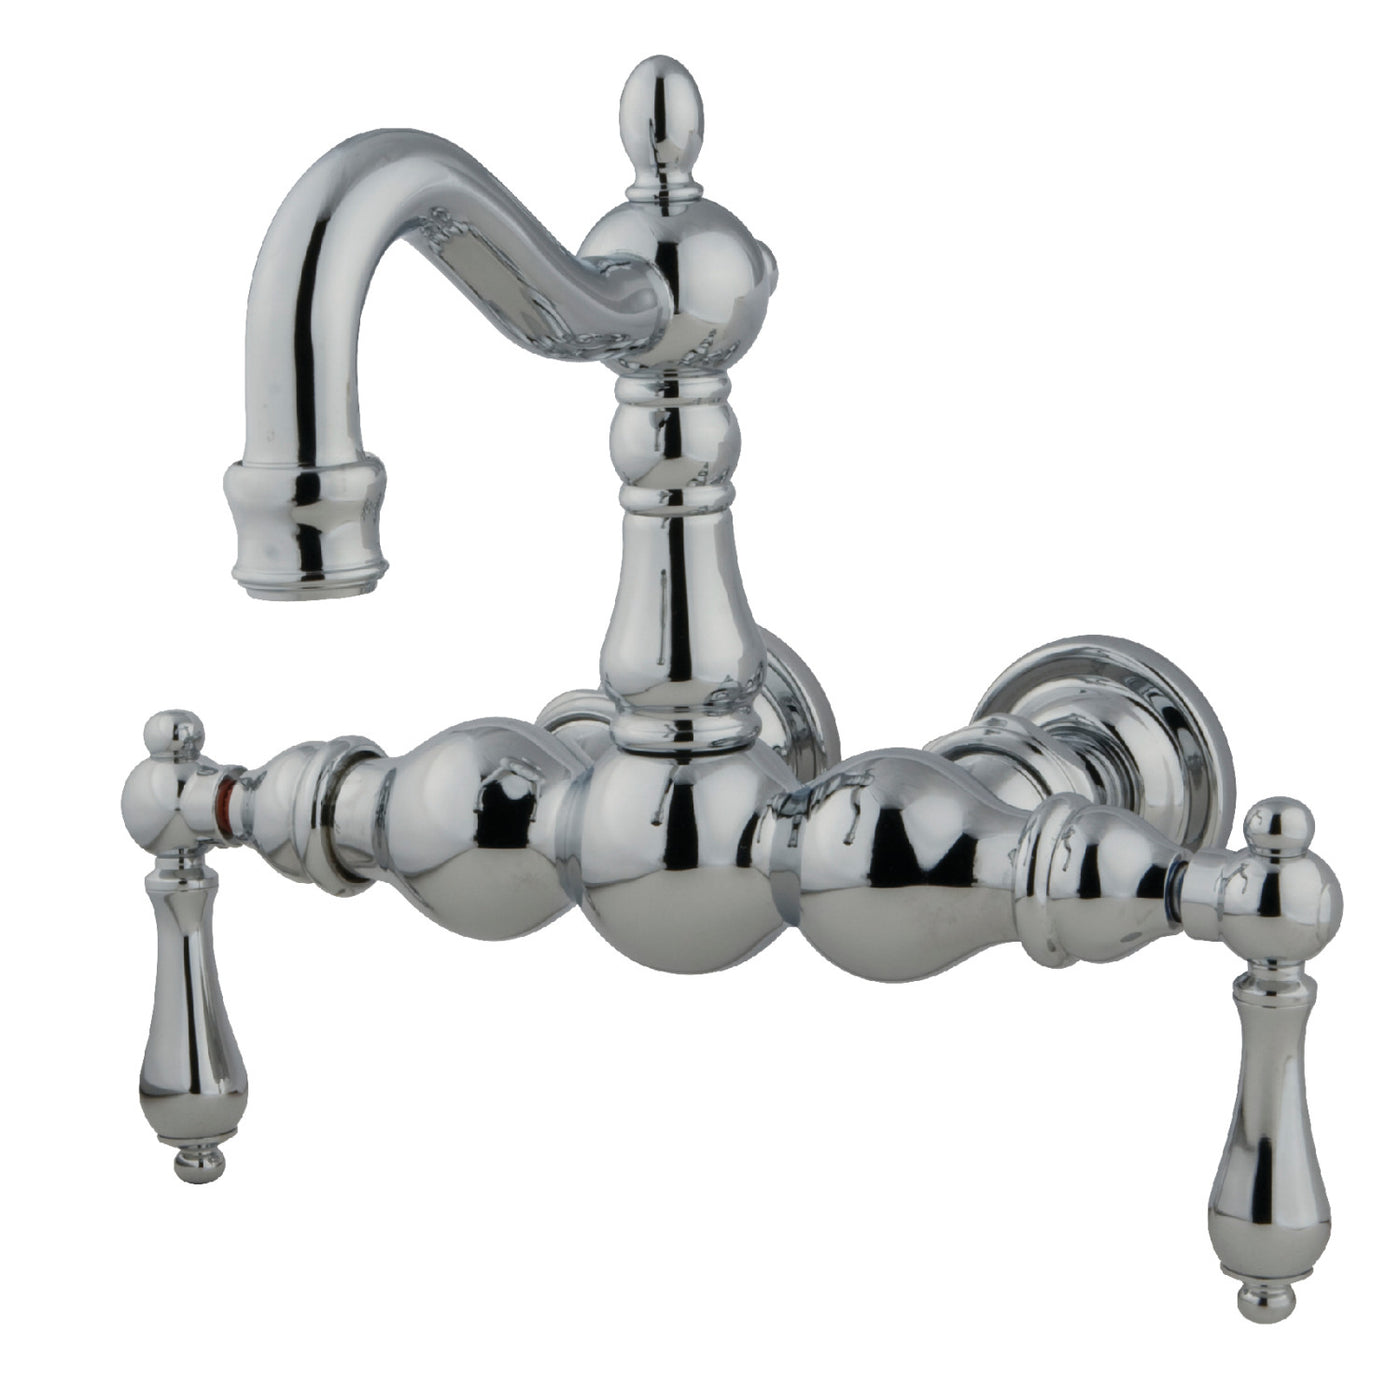 Elements of Design DT10021AL 3-3/8-Inch Wall Mount Tub Faucet, Polished Chrome